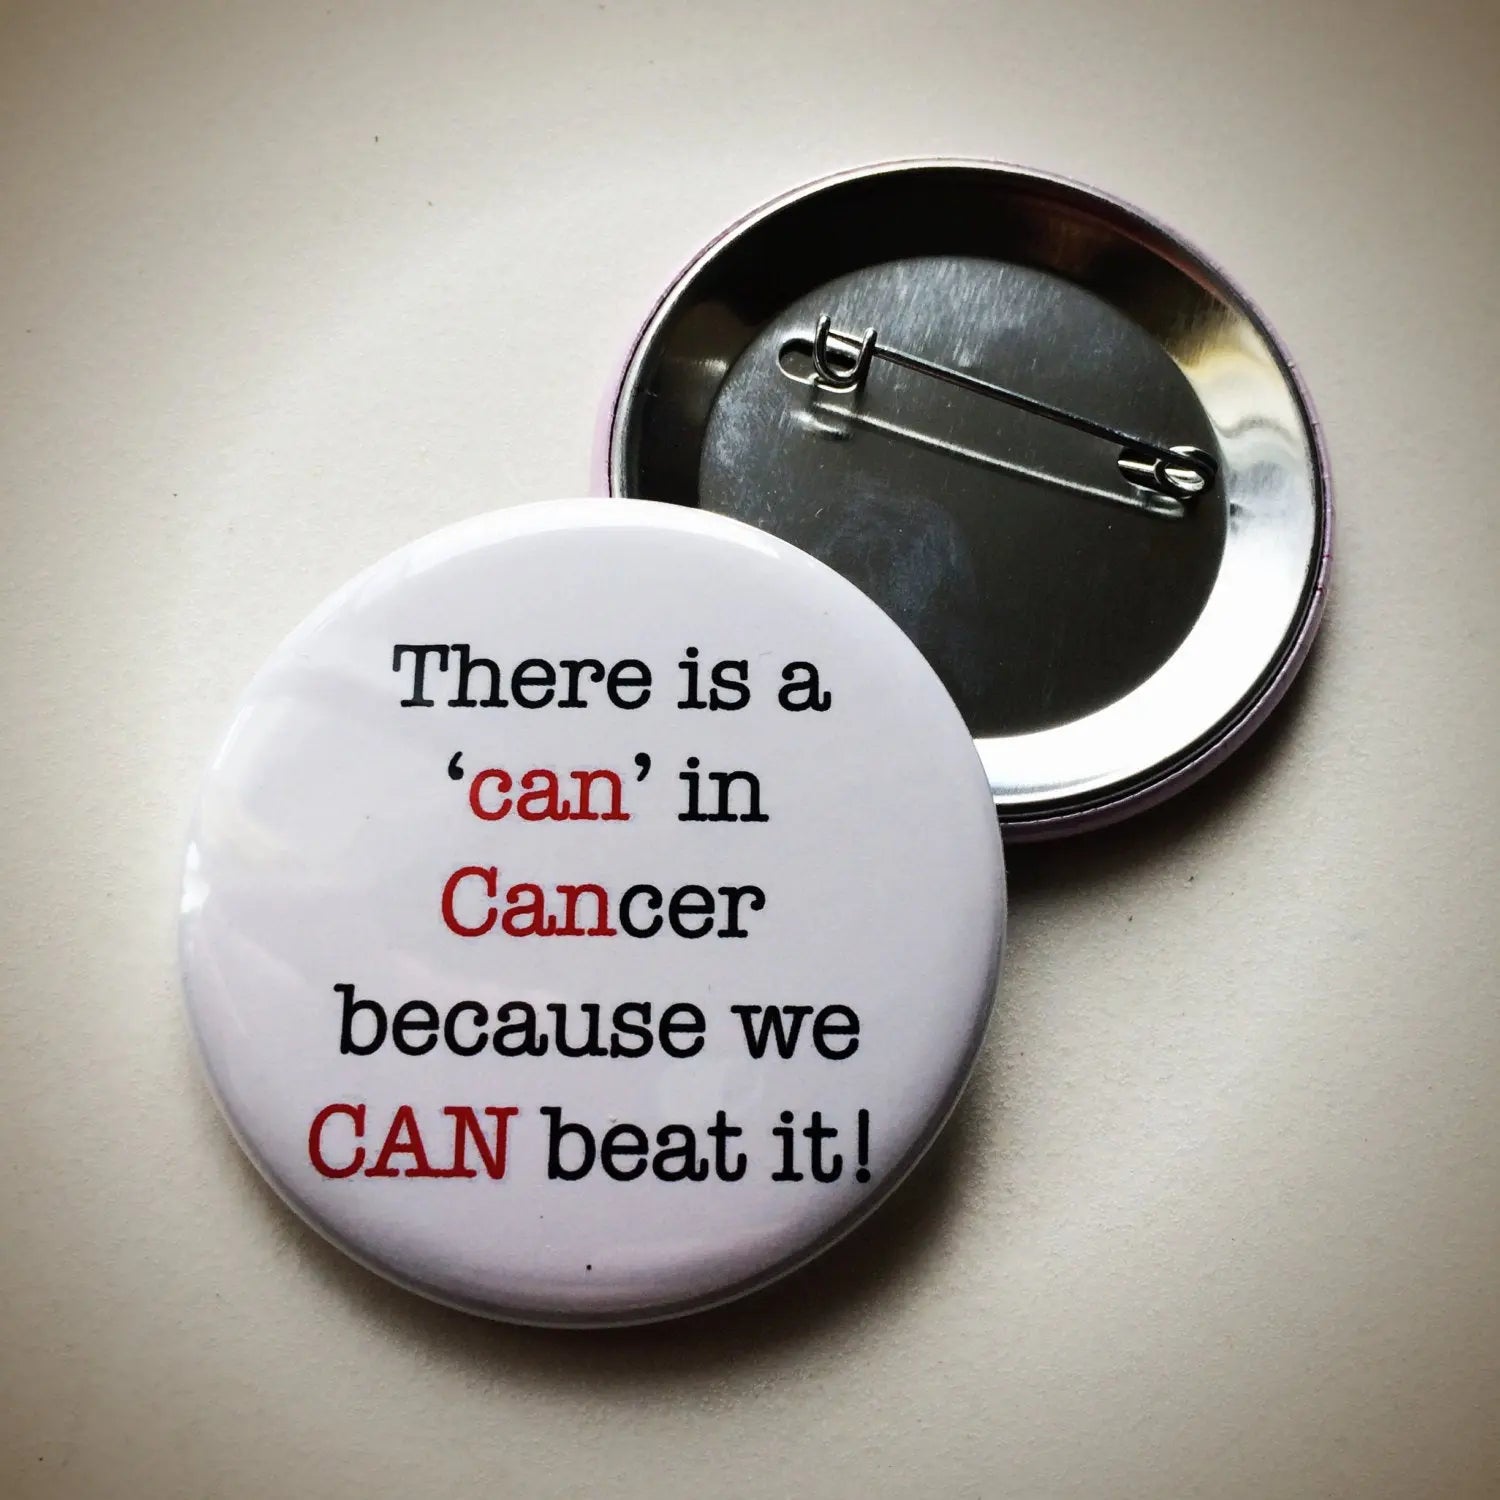 Personalized Pin-spirational Pins - Cancer Awareness Pins - Custom Cancer Pin - Fuck Cancer - Custom Cancer Button for Blood Cancer 10 pcs busybeecreates